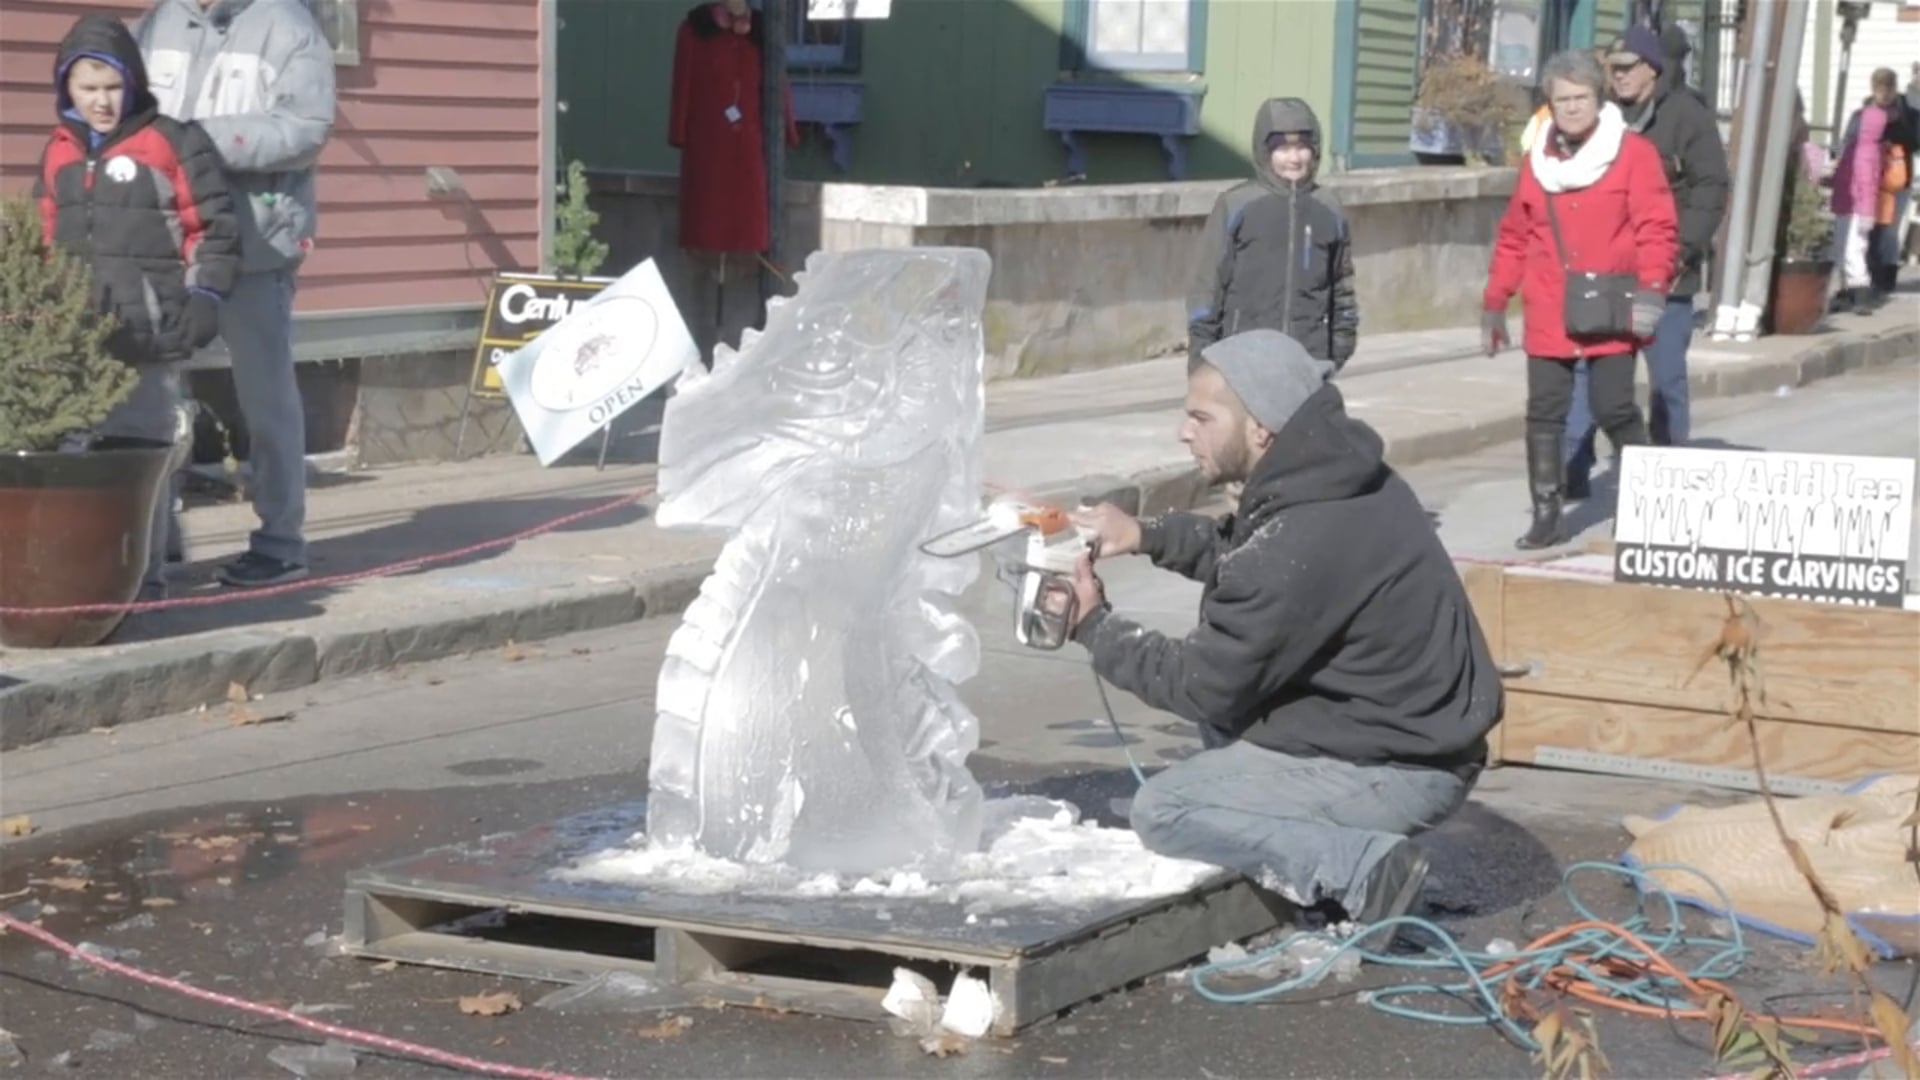 Mount Holly Fire & Ice Festival